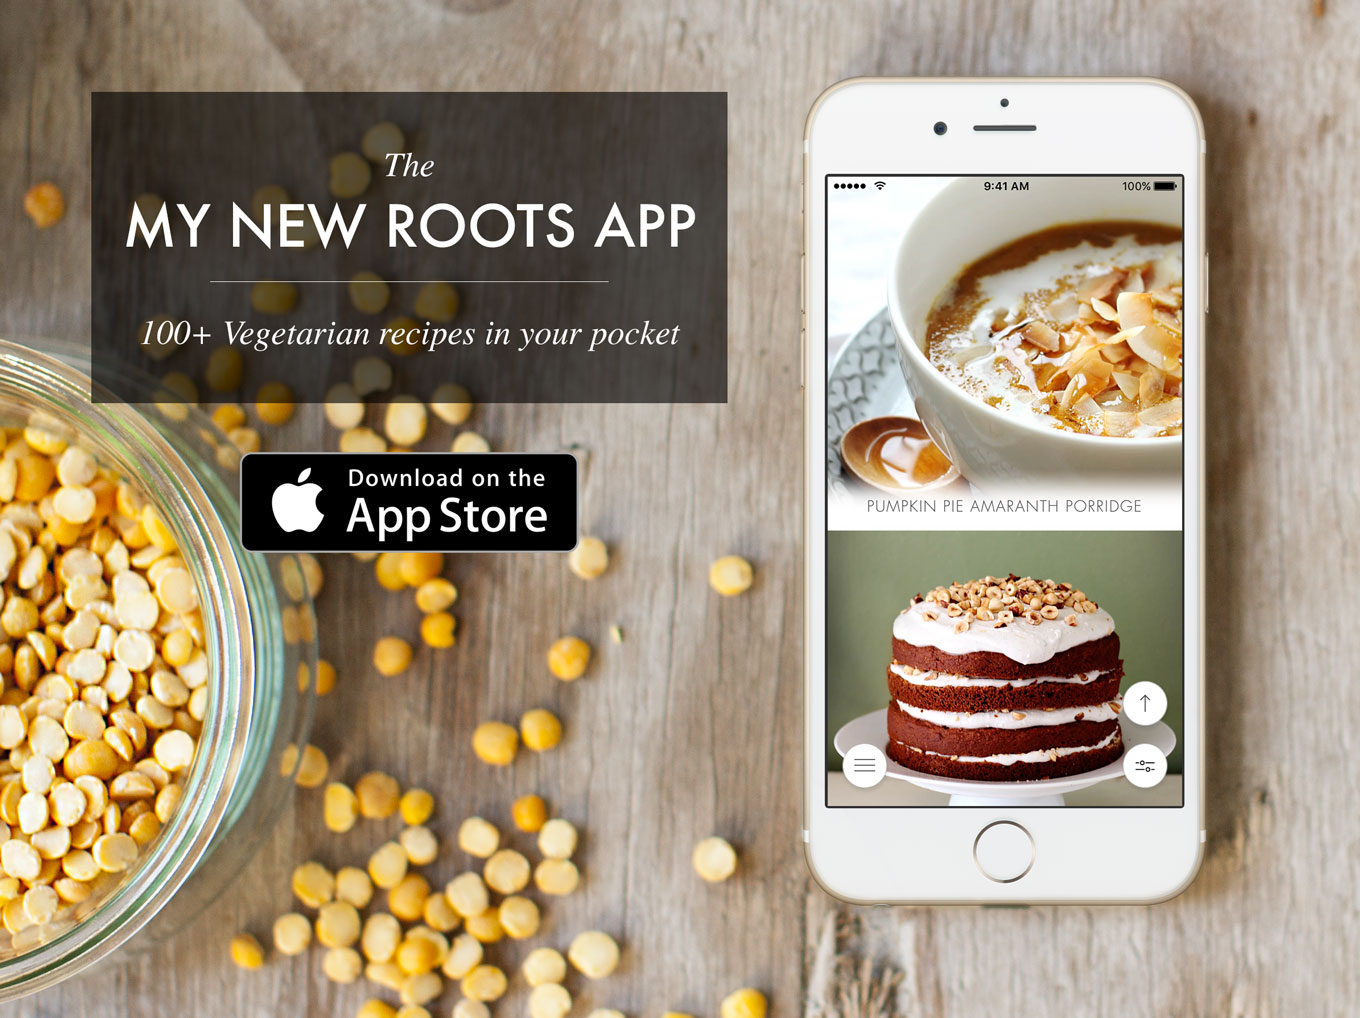 Download the My New Roots app